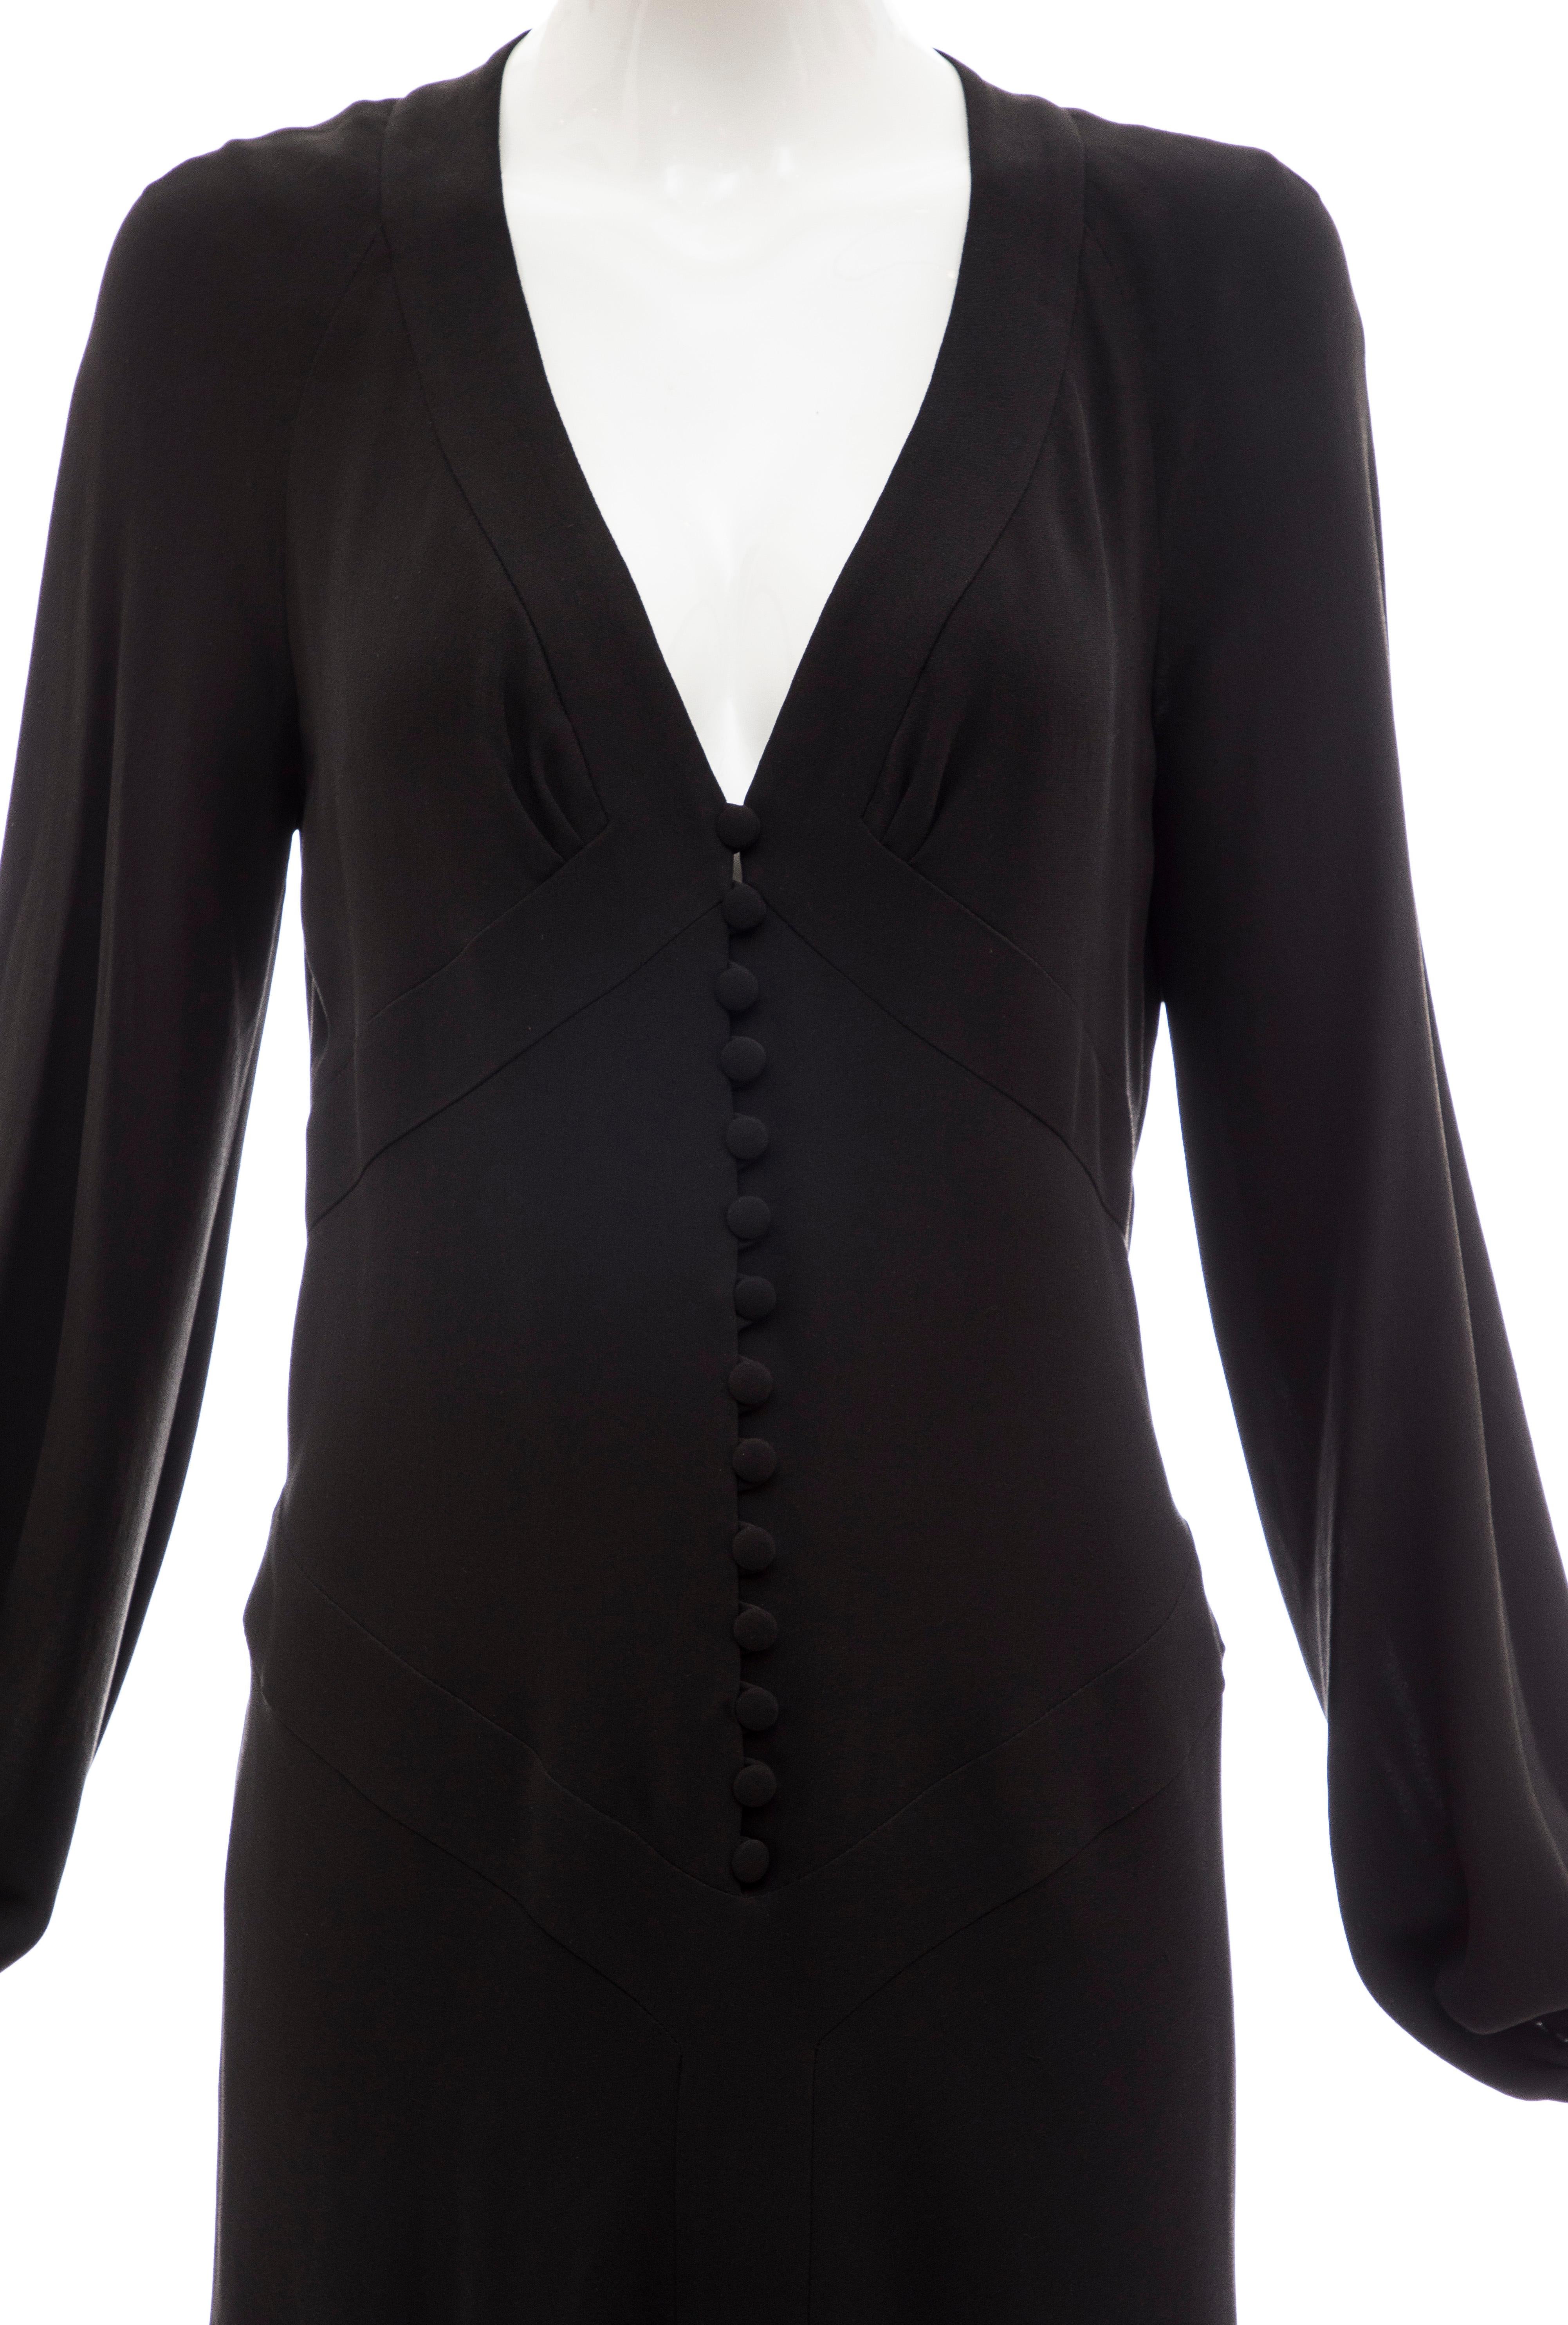 Alexander McQueen Black Silk Button Front Long Sleeve Dress, Spring 2007  In New Condition For Sale In Cincinnati, OH